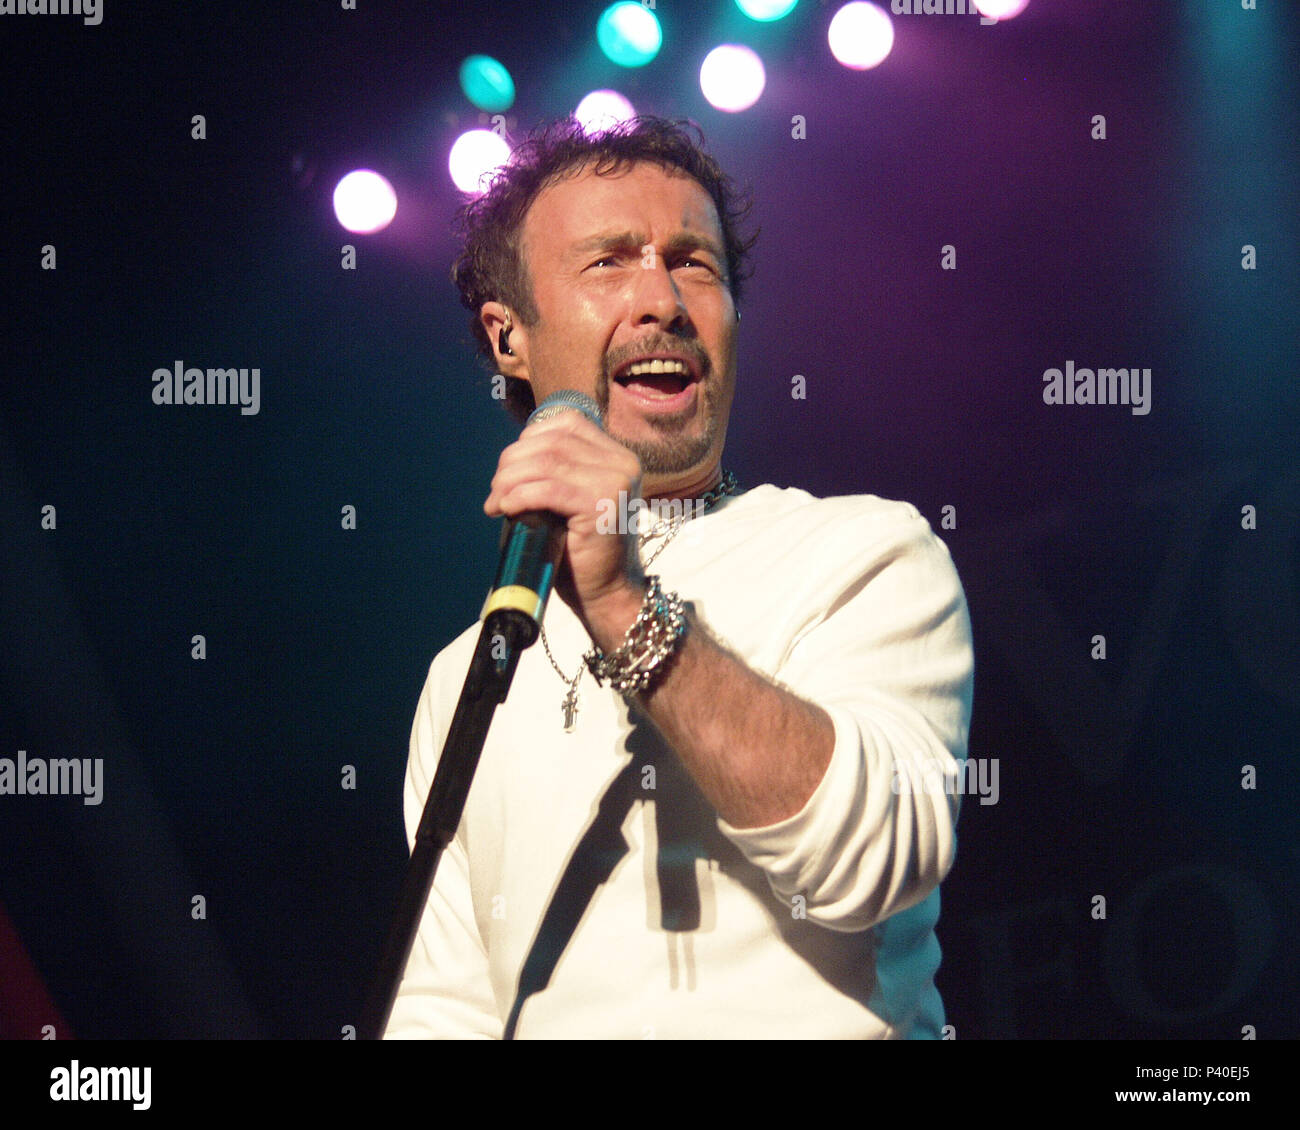 ATLANTA, GA - OCTOBER 20: Paul Rodgers of Bad Company performs during the Volunteers For America concert at Lakewood Amphitheatre in Atlanta, Georgia on October 20, 2001. The concert was held to raise funds to benefit the families of the victims of the September 11 (9/11) attacks on the United States of America. Additional beneficiaries of the concert include The American Red Cross, the New York City Fire Department, and the New York City Police Department. CREDIT: Chris McKay / MediaPunch Stock Photo